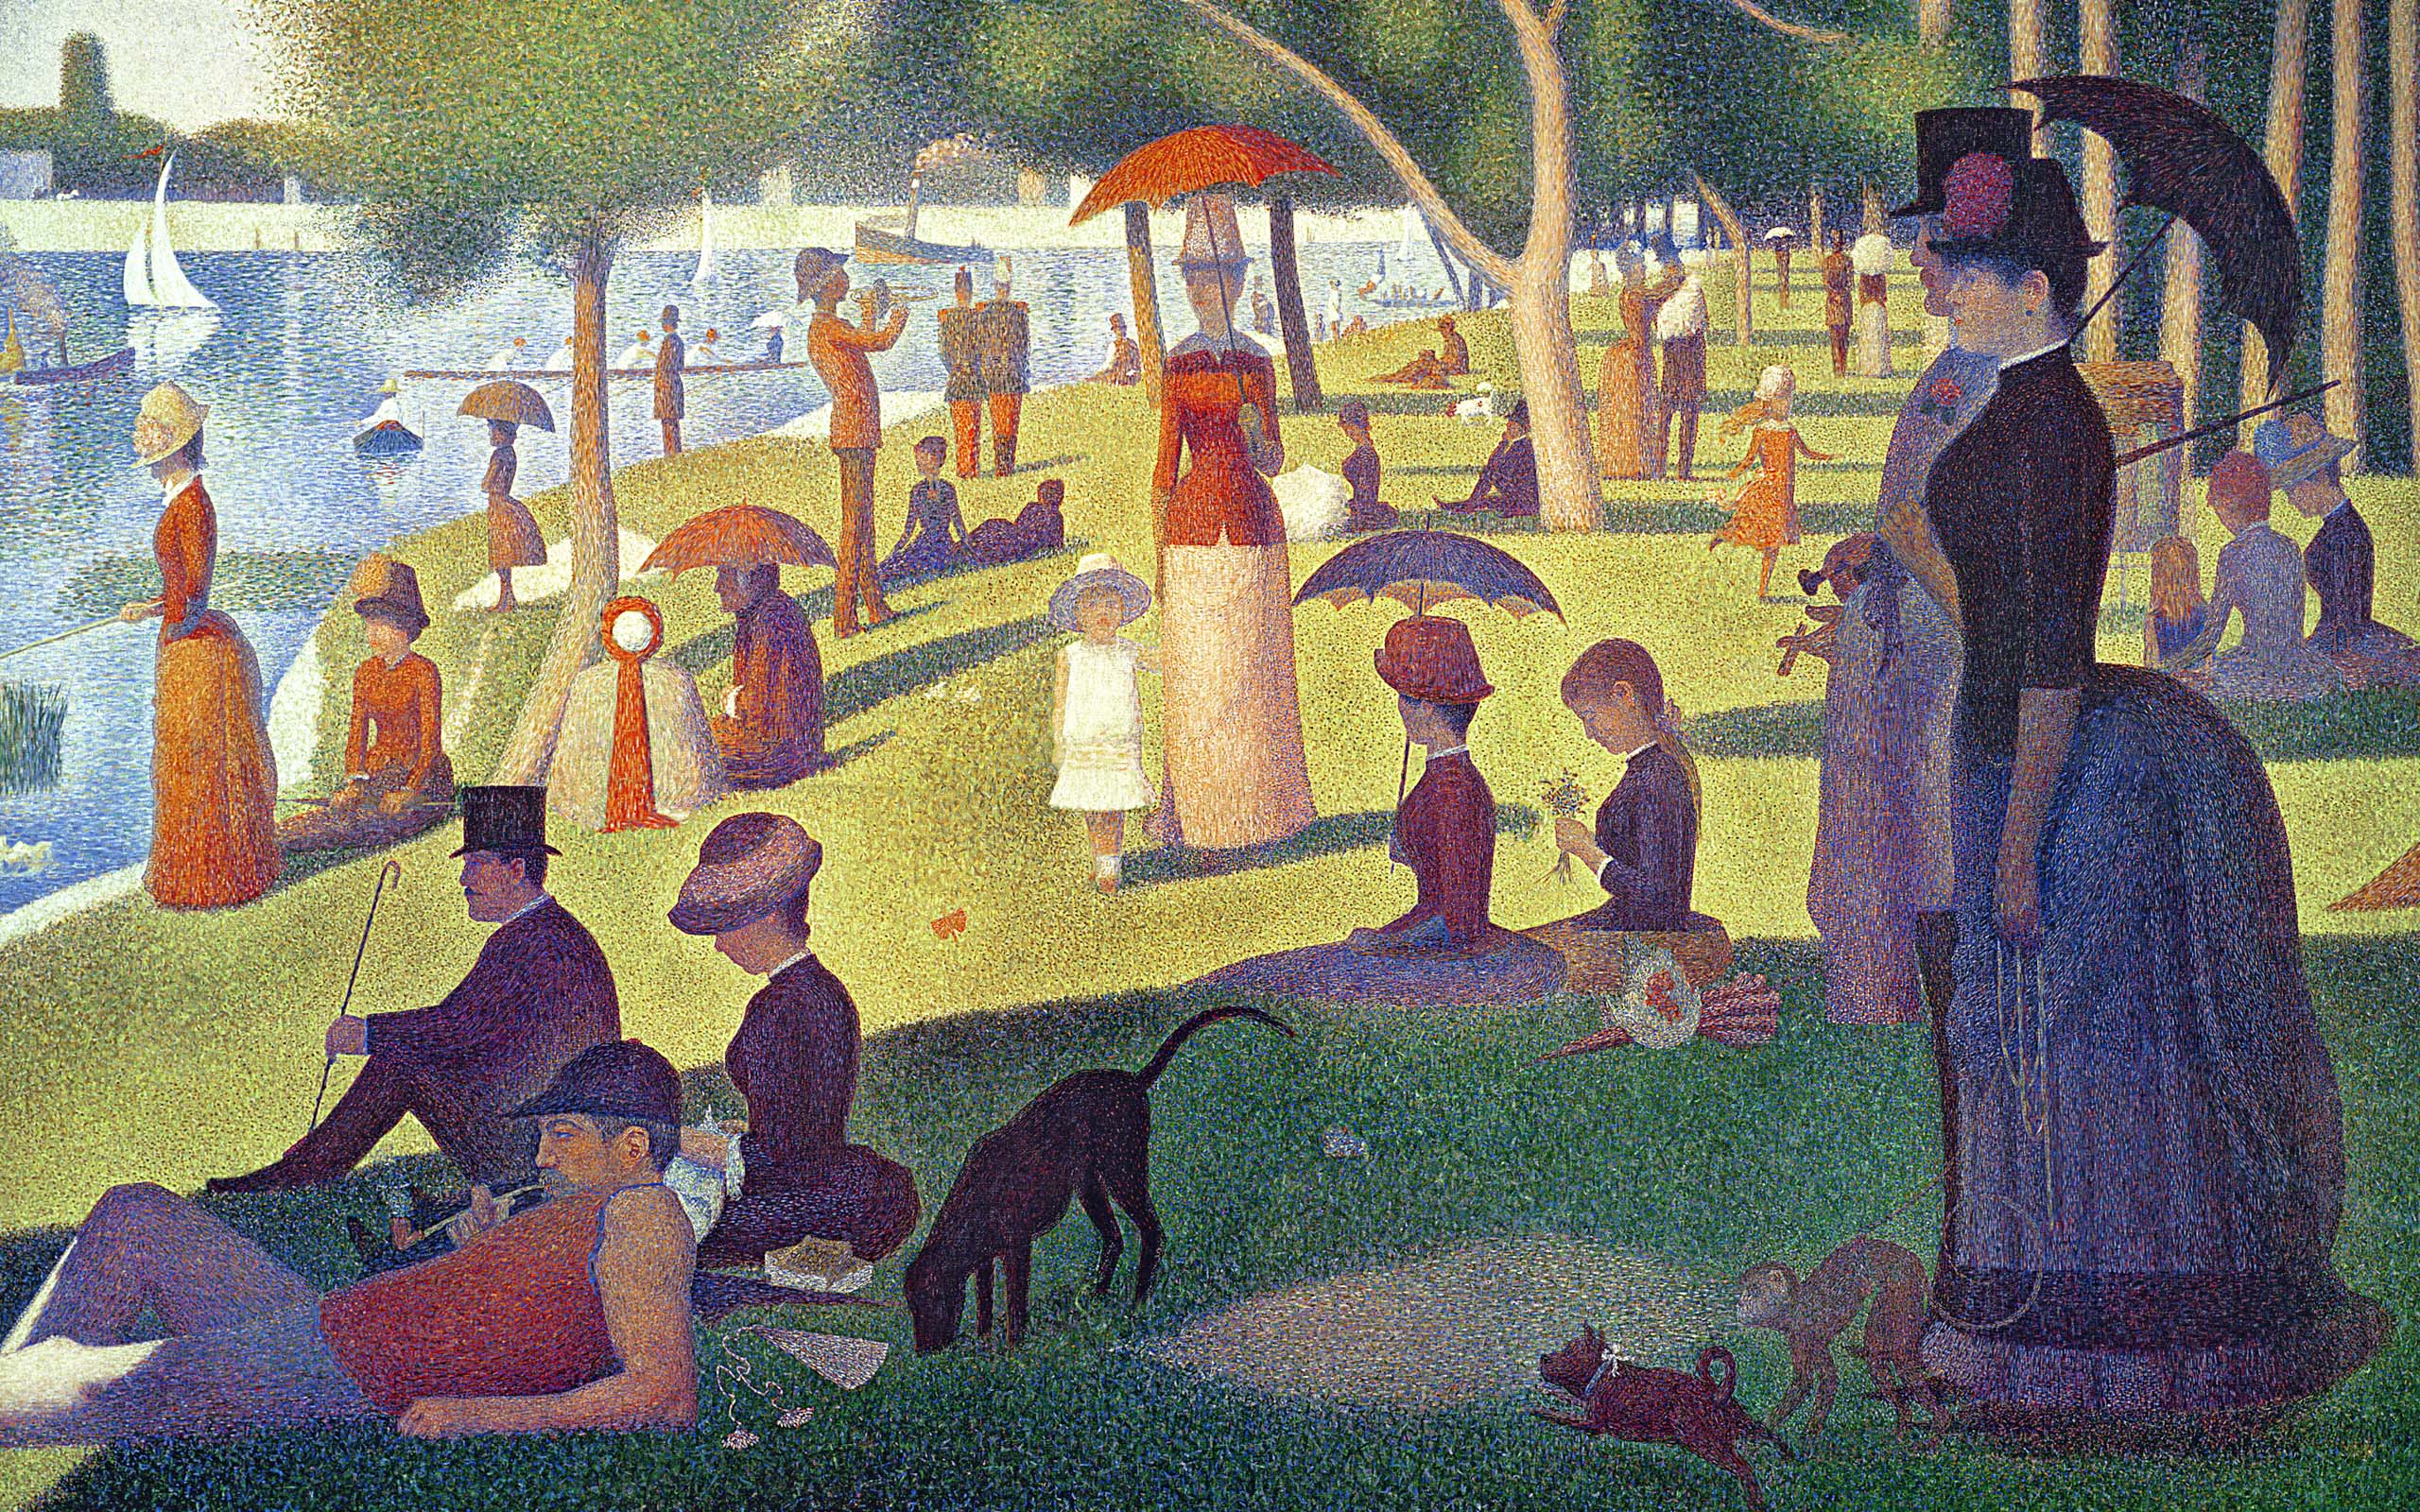 A scenic painting by Seurat: A Sunday Afternoon on the Island of La Grande Jatte.